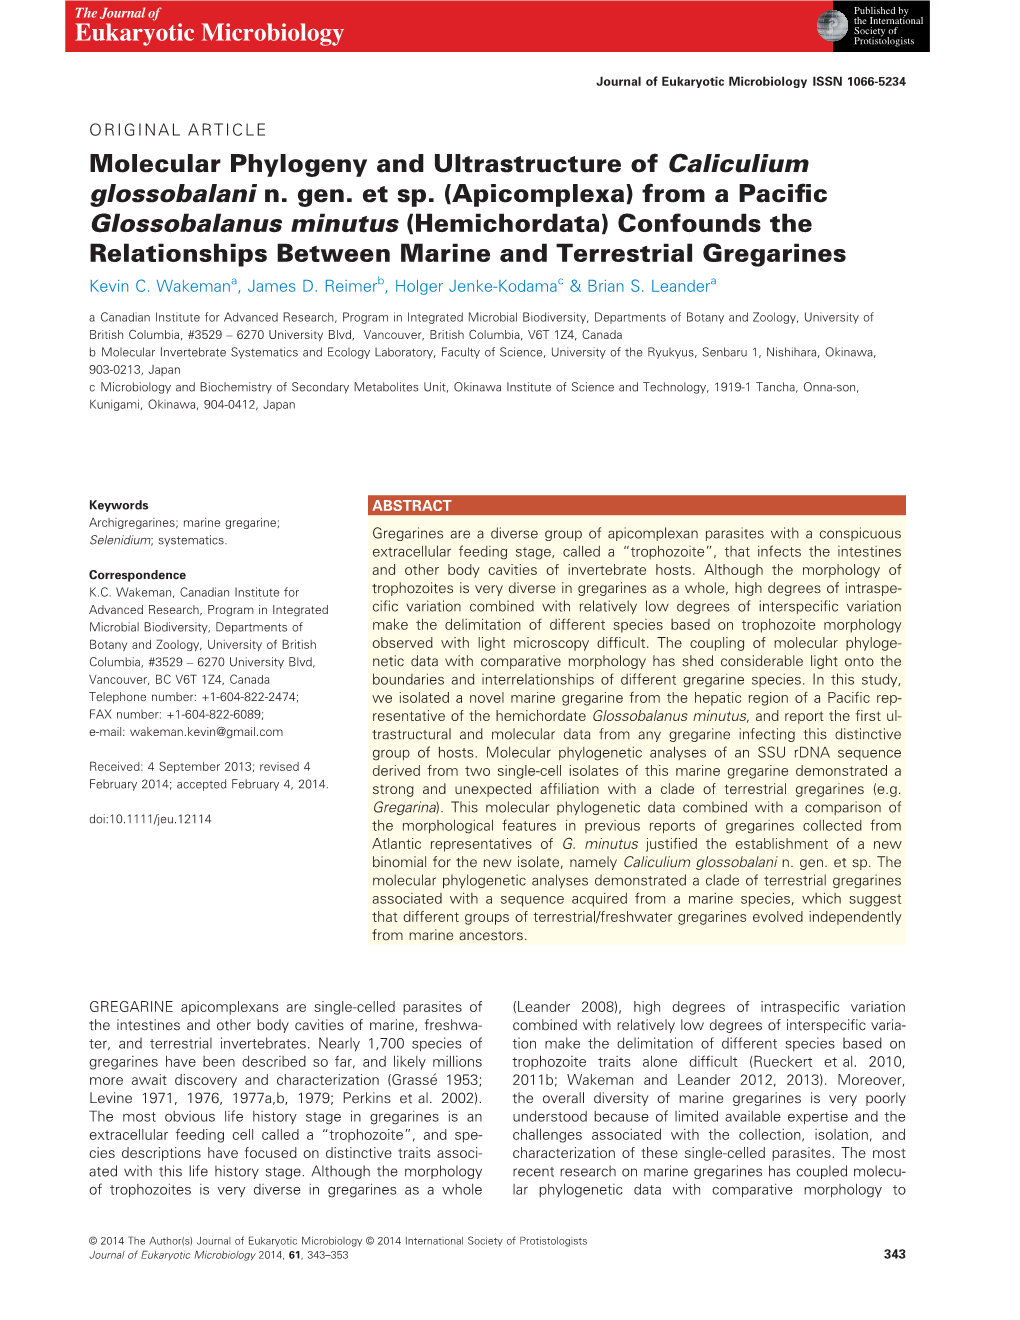 Molecular Phylogeny and Ultrastructure of Caliculium Glossobalani N